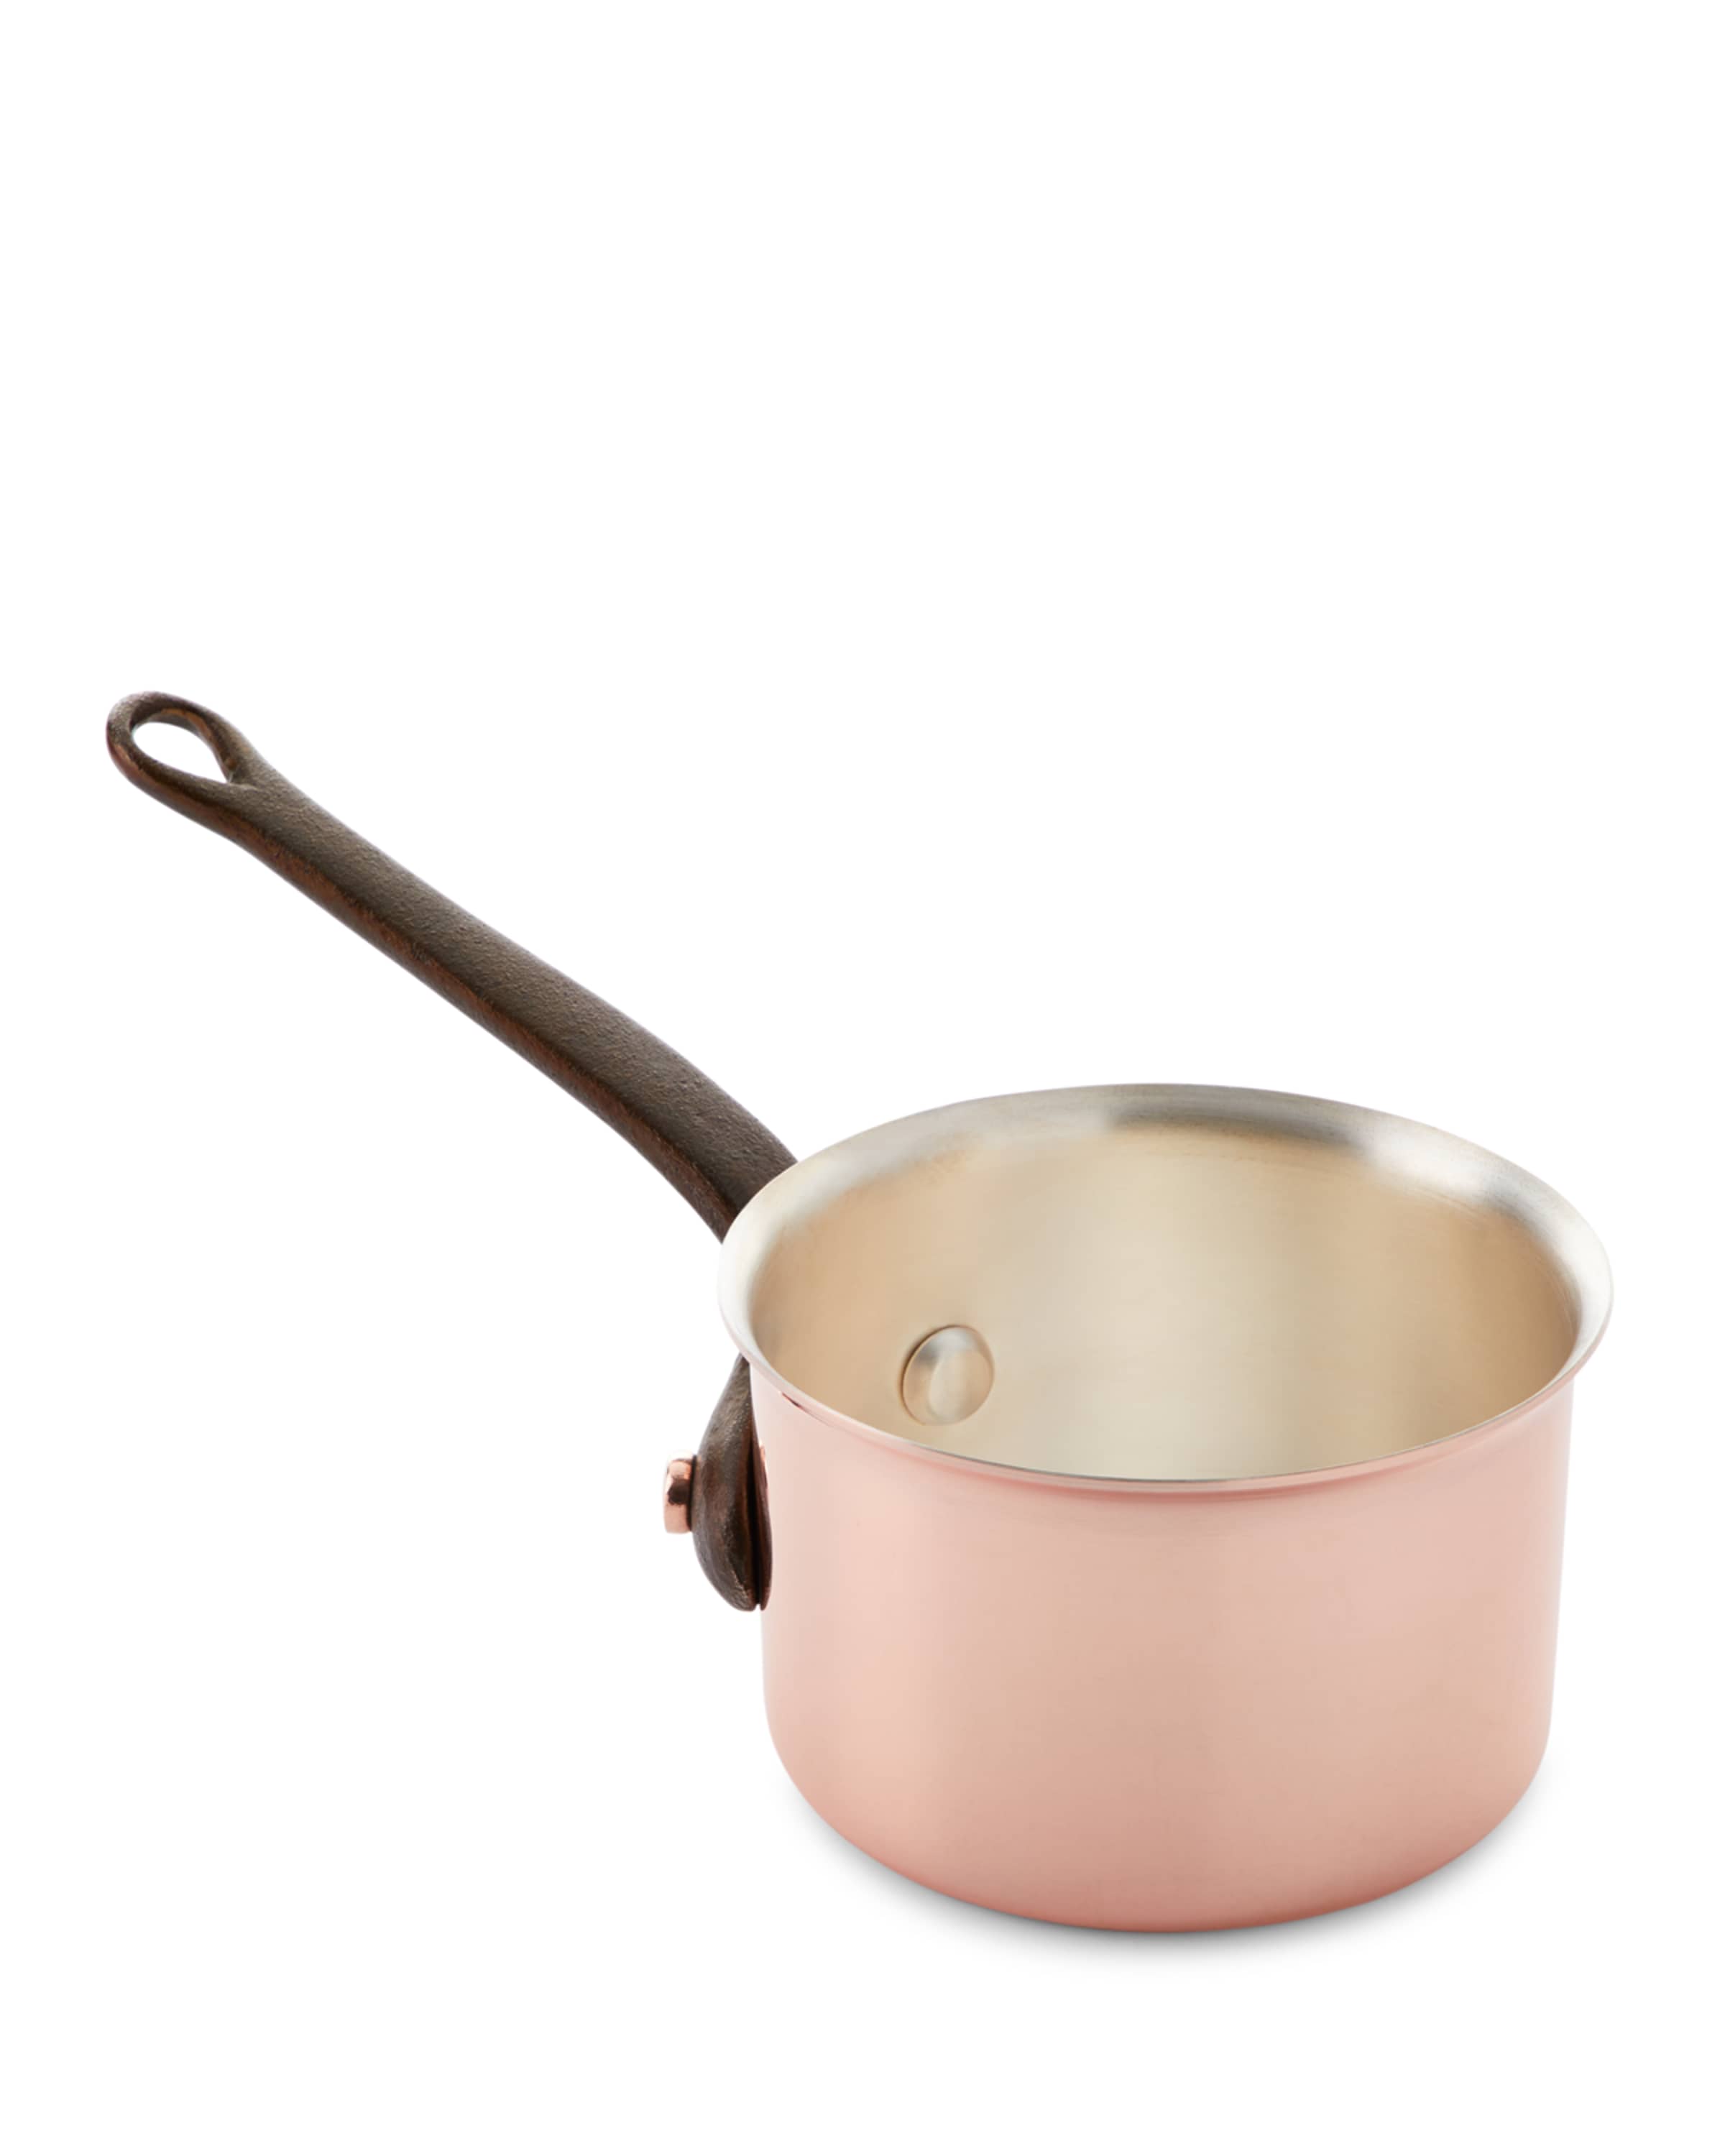 Duparquet Copper Cookware Solid Copper Sauce Pan with Silver Lining, 5.5"Dia.